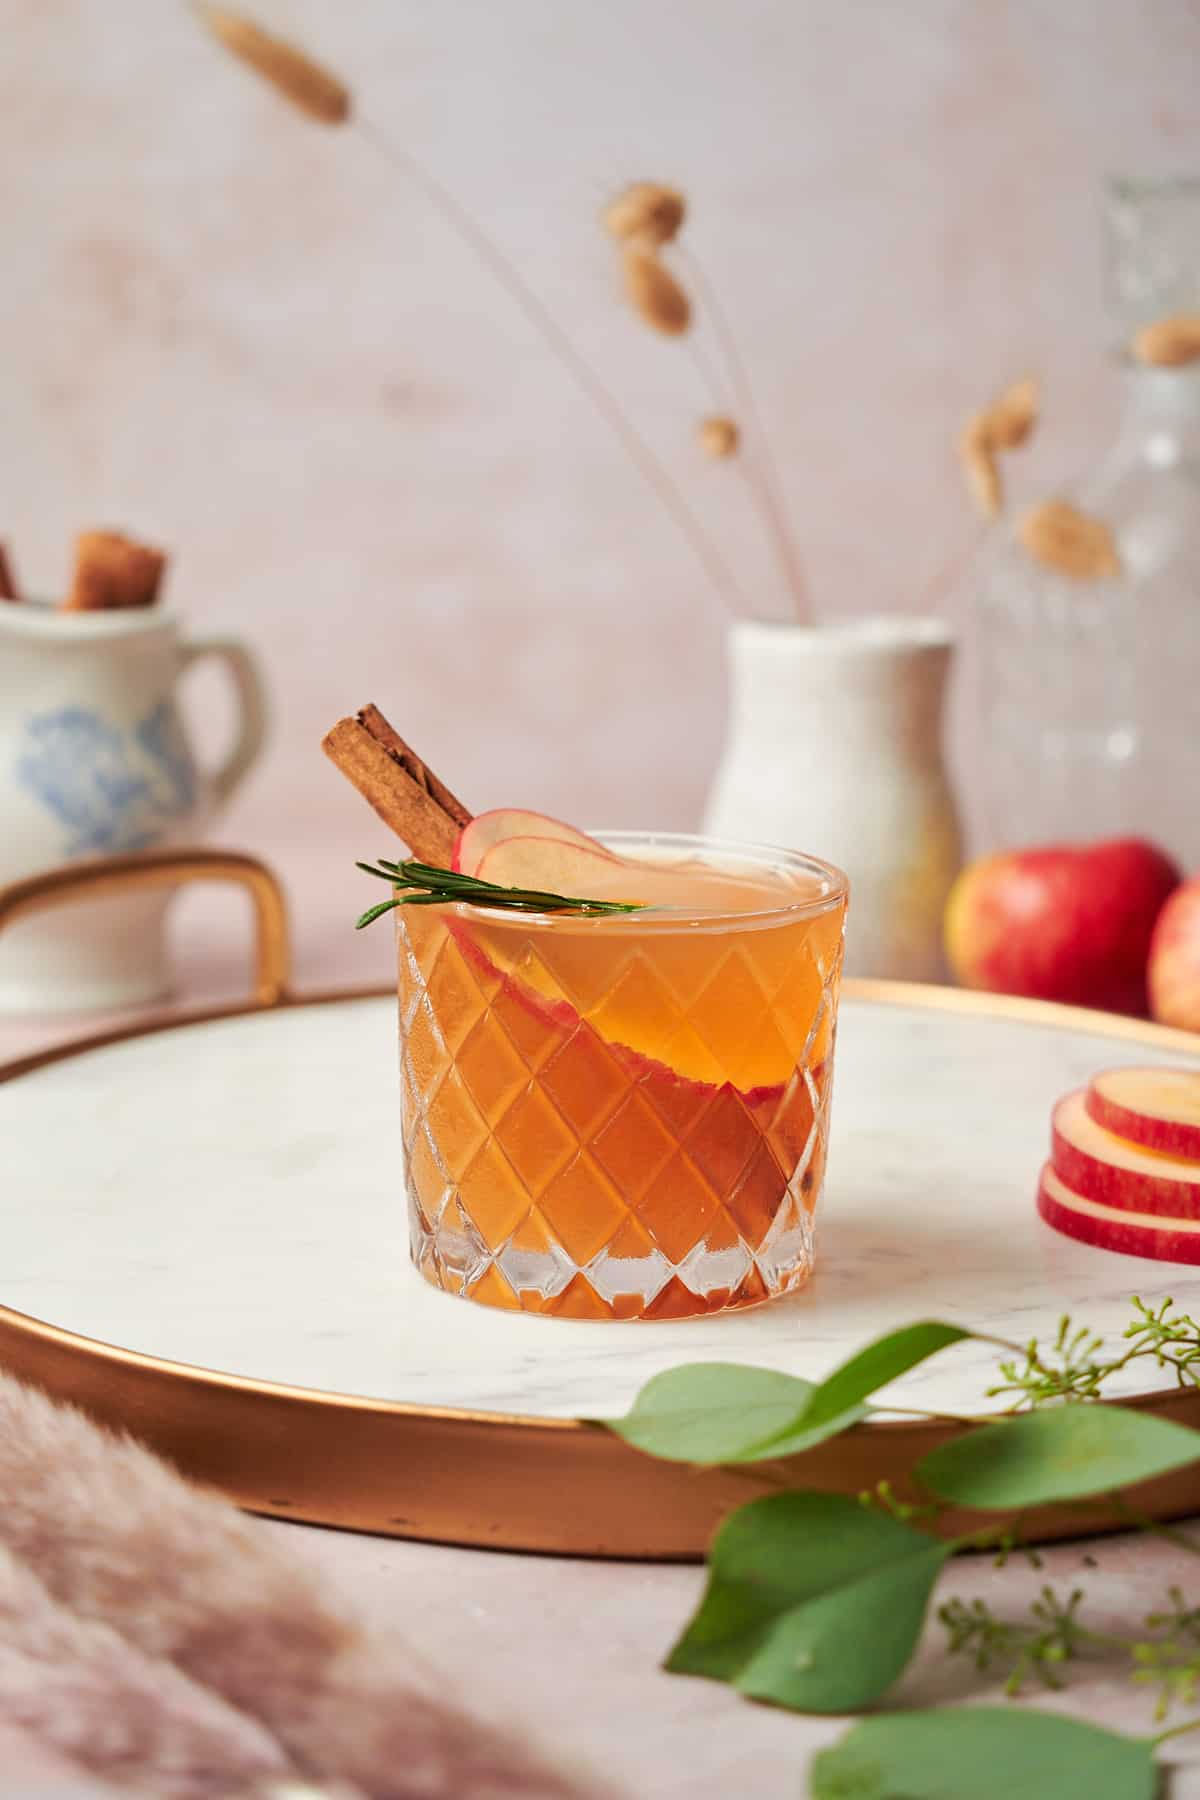 photo of an apple cider bourbon cocktail with a cinnamon stick and rosemary sprig, with apples and pampas grass in the background.